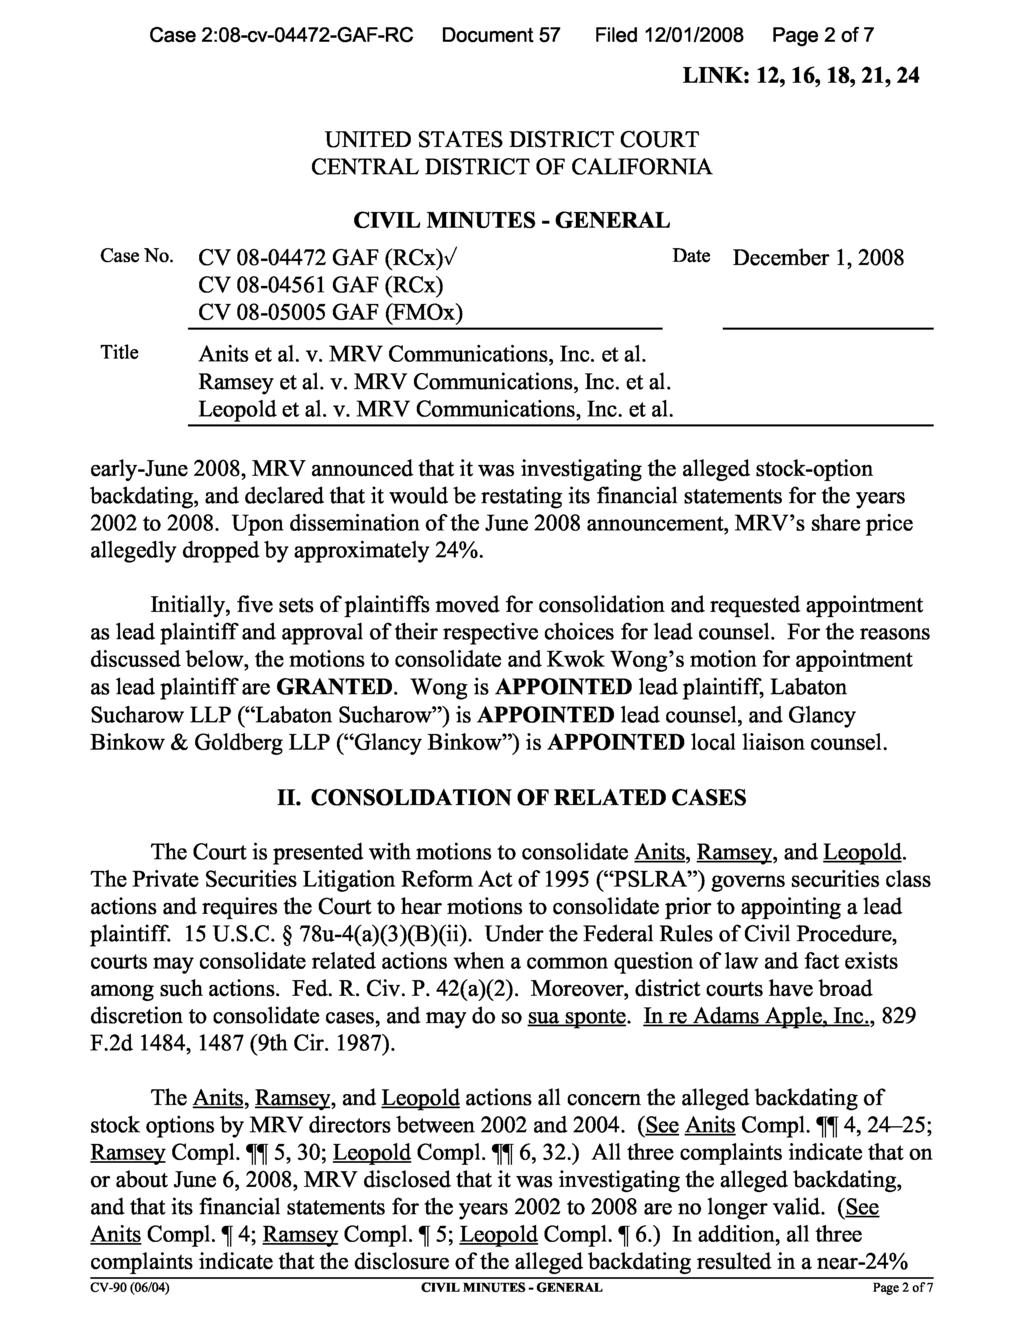 Case 2:08-cv-04472-GAF-RC Document 57 Filed 12/01/2008 Page 2 of 7 early-june 2008, MRV announced that it was investigating the alleged stock-option backdating, and declared that it would be